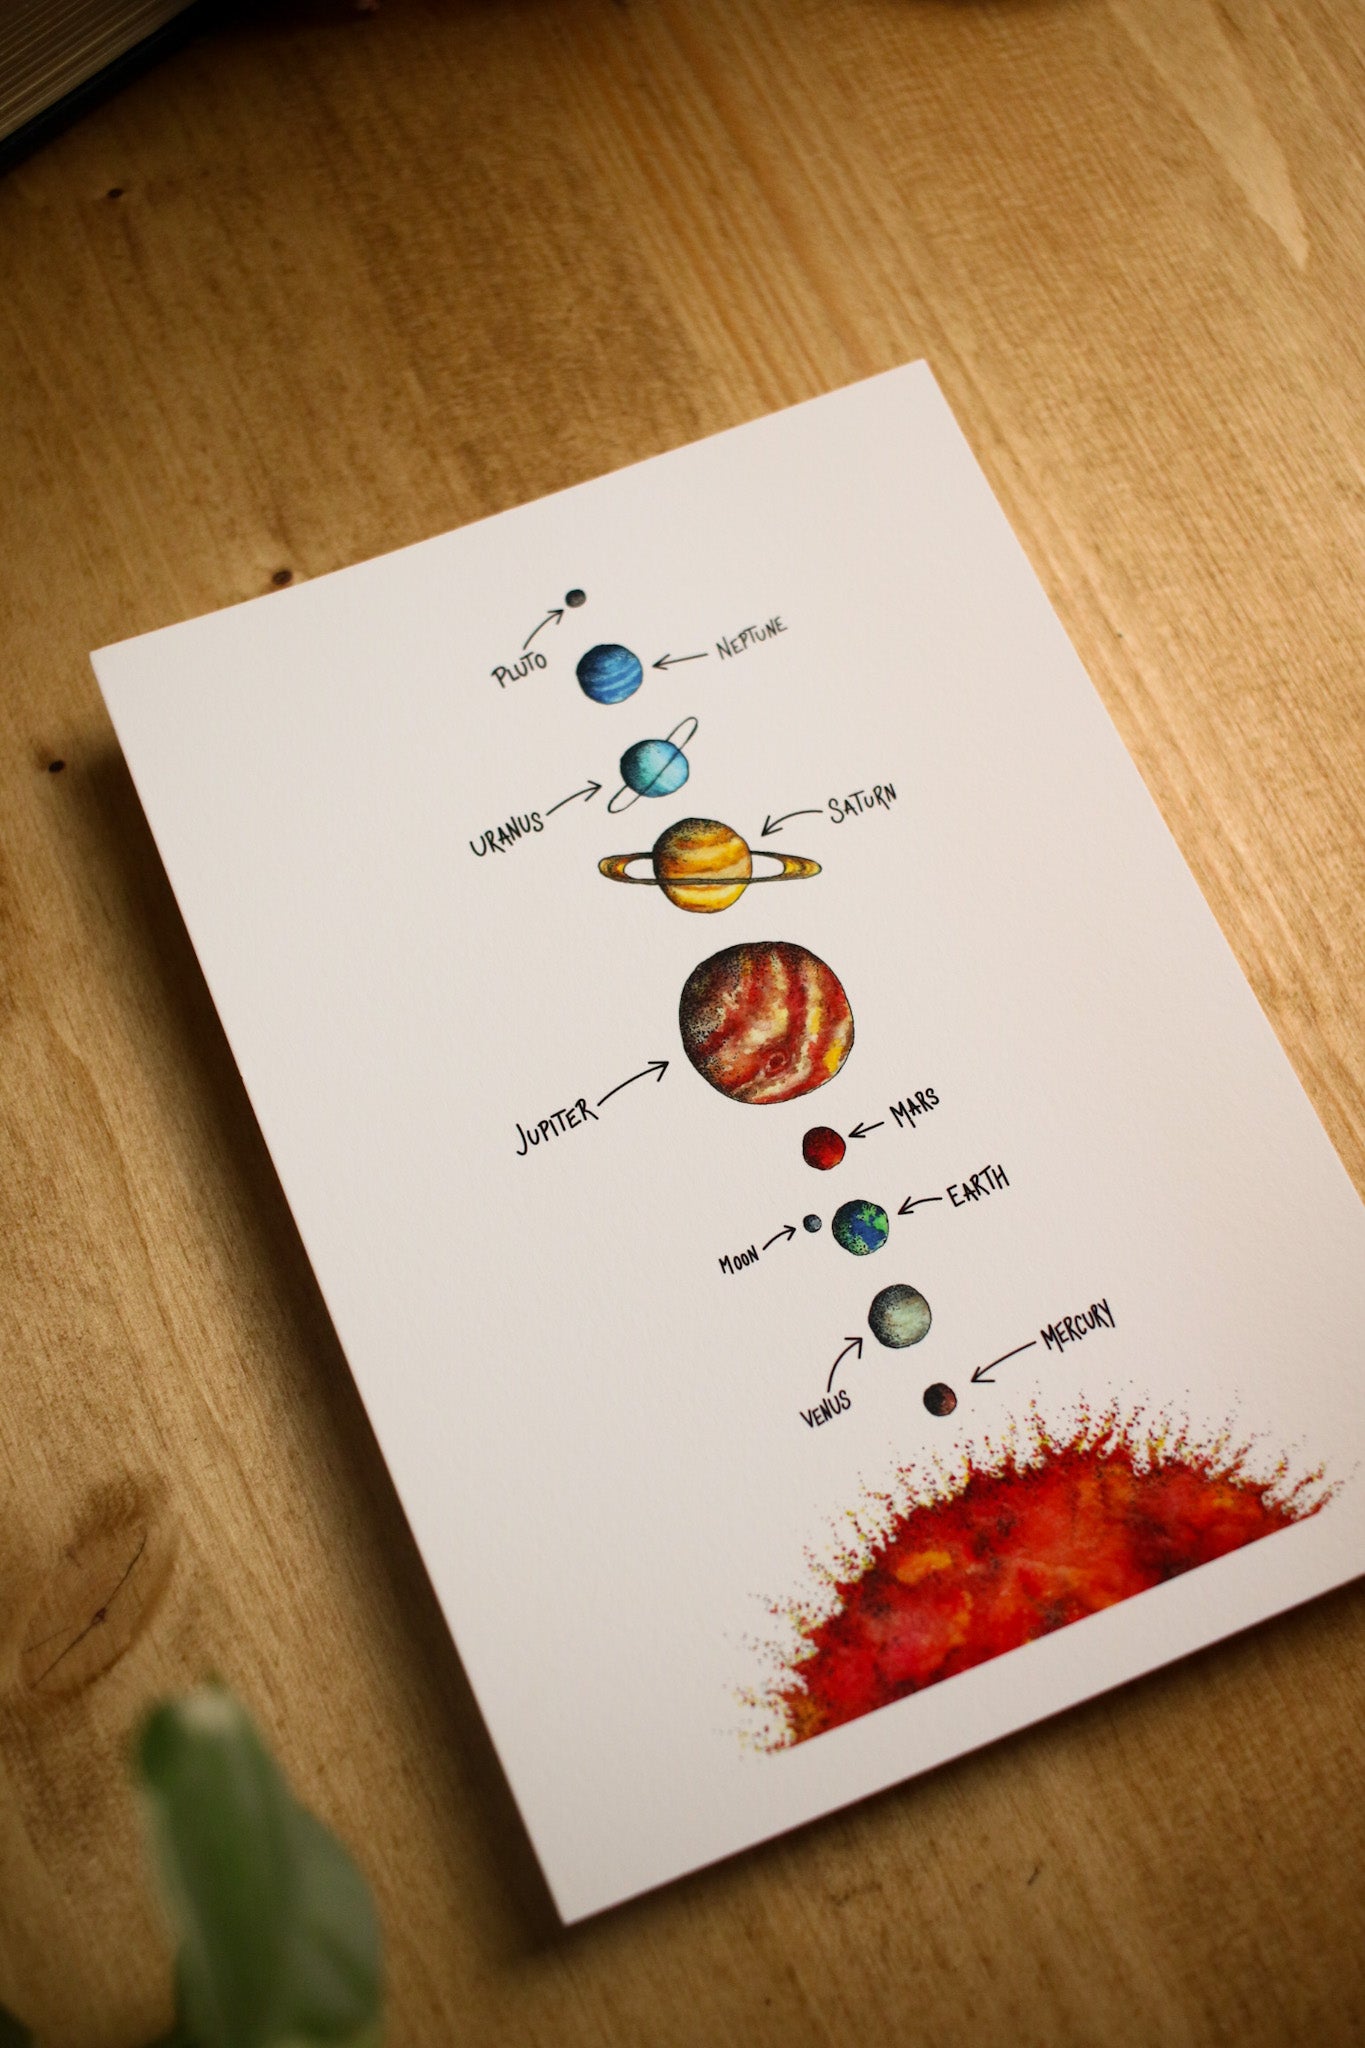 SECONDS - Solar System (Labelled) 5x7 Print